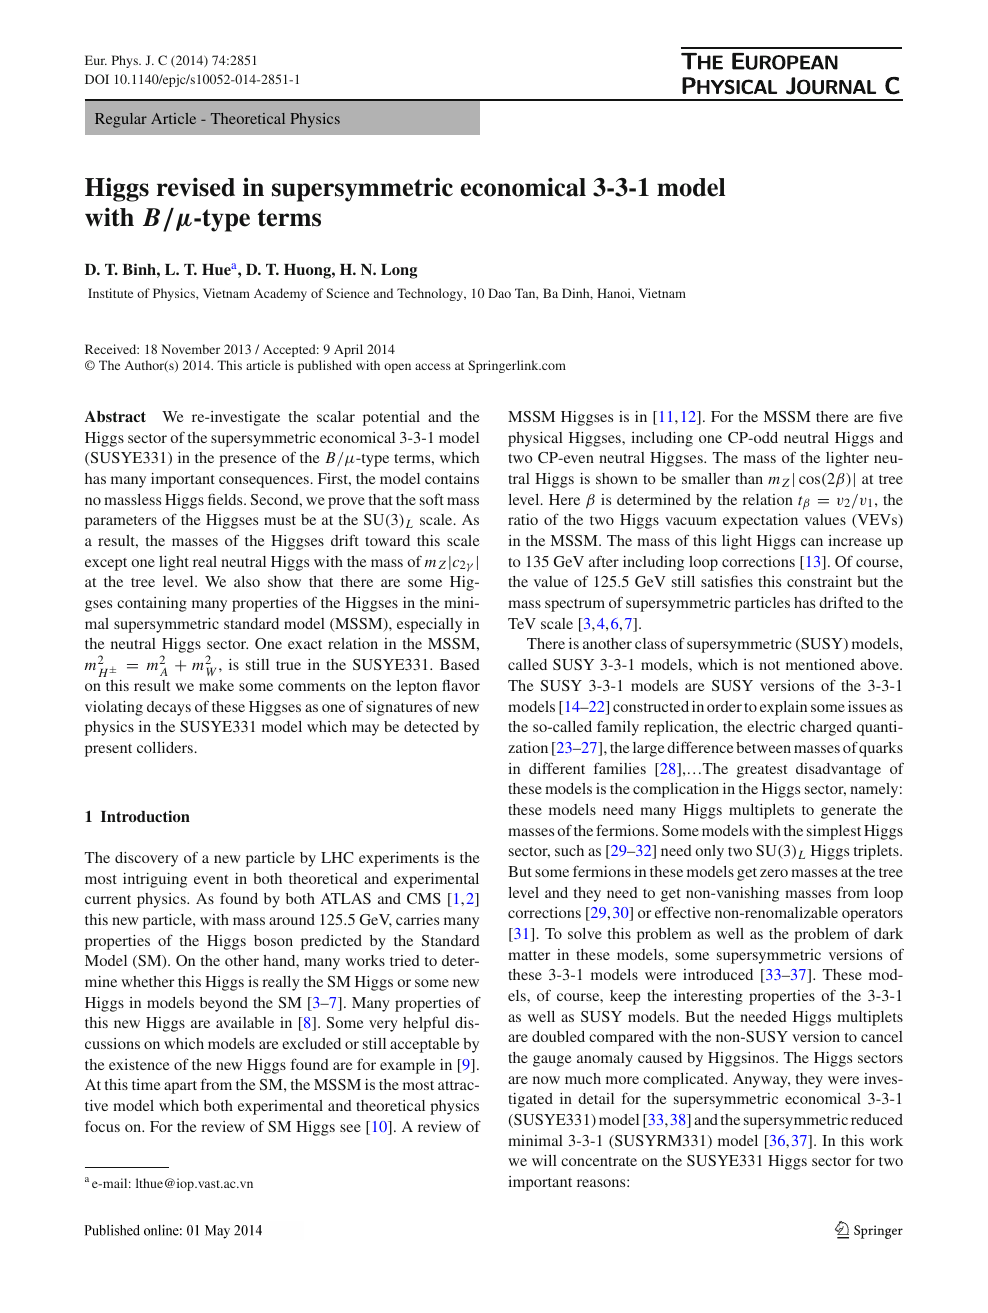 Higgs Revised In Supersymmetric Economical 3 3 1 Model With B Mu B M Type Terms Topic Of Research Paper In Physical Sciences Download Scholarly Article Pdf And Read For Free On